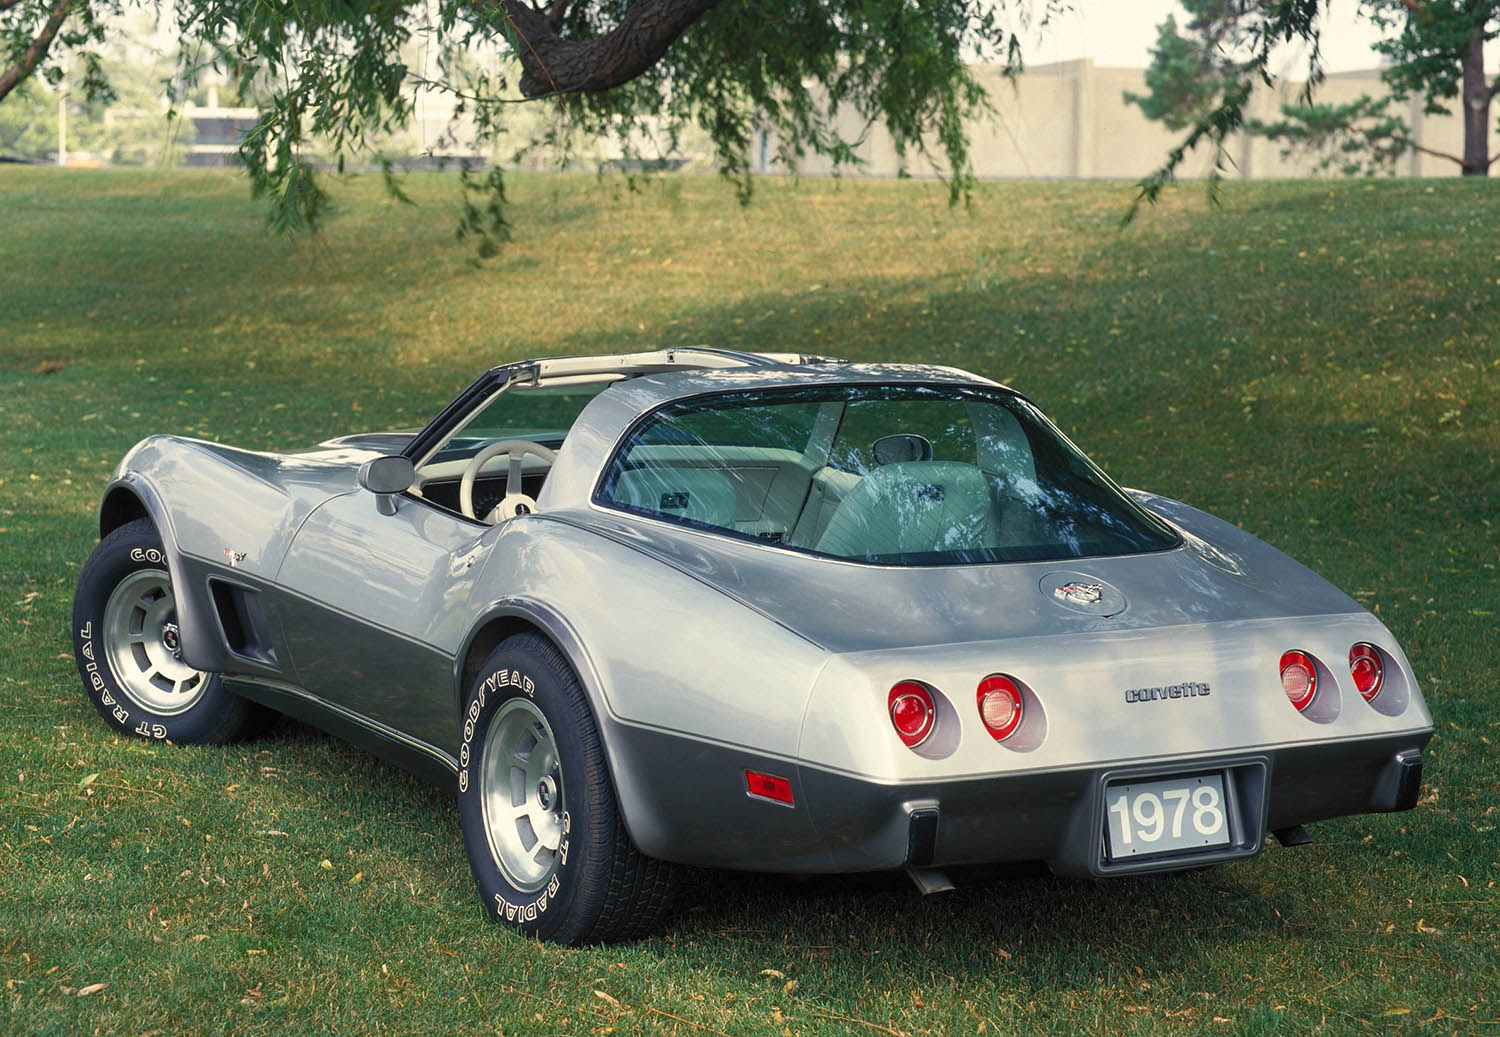 1978 Chevrolet Corvette Silver Anniversary Edition parked on a lawn underneath a tree